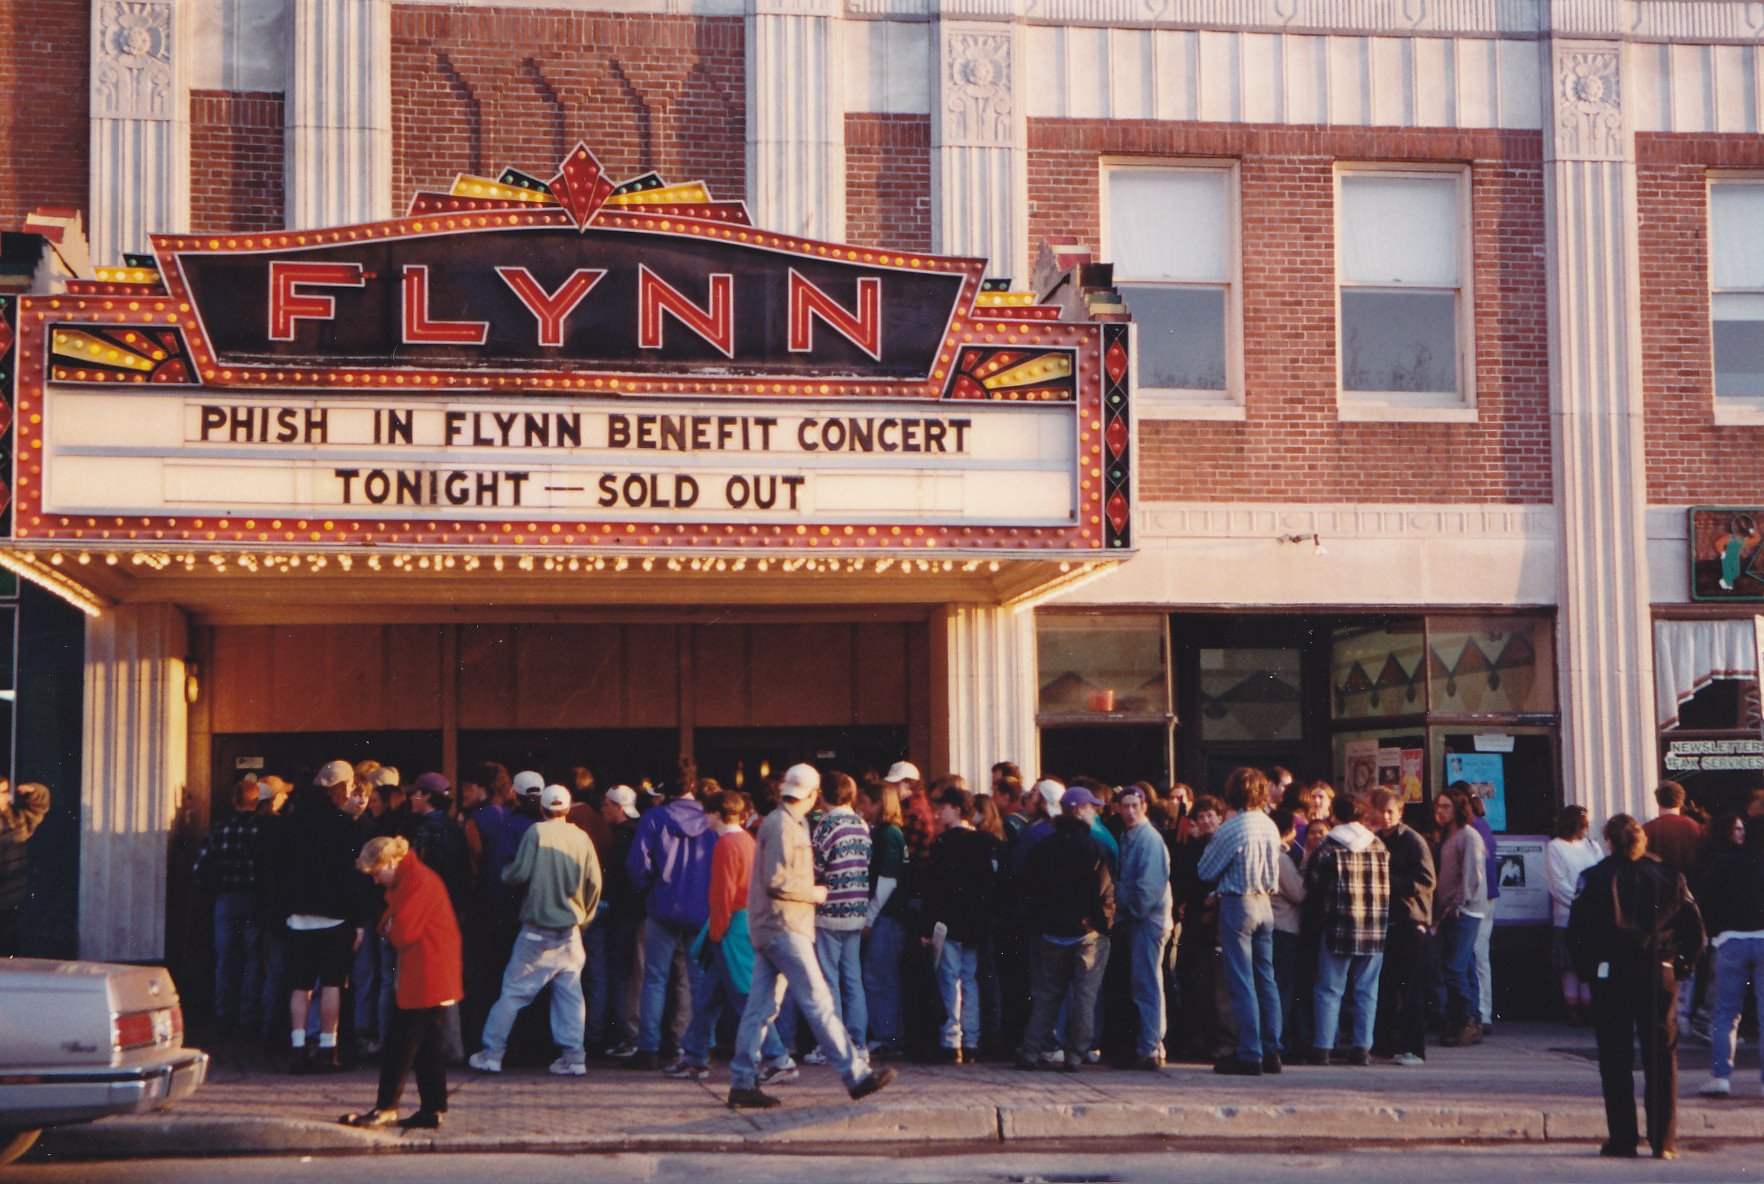 The Flynn marquee with Phish benefit concert on the front.